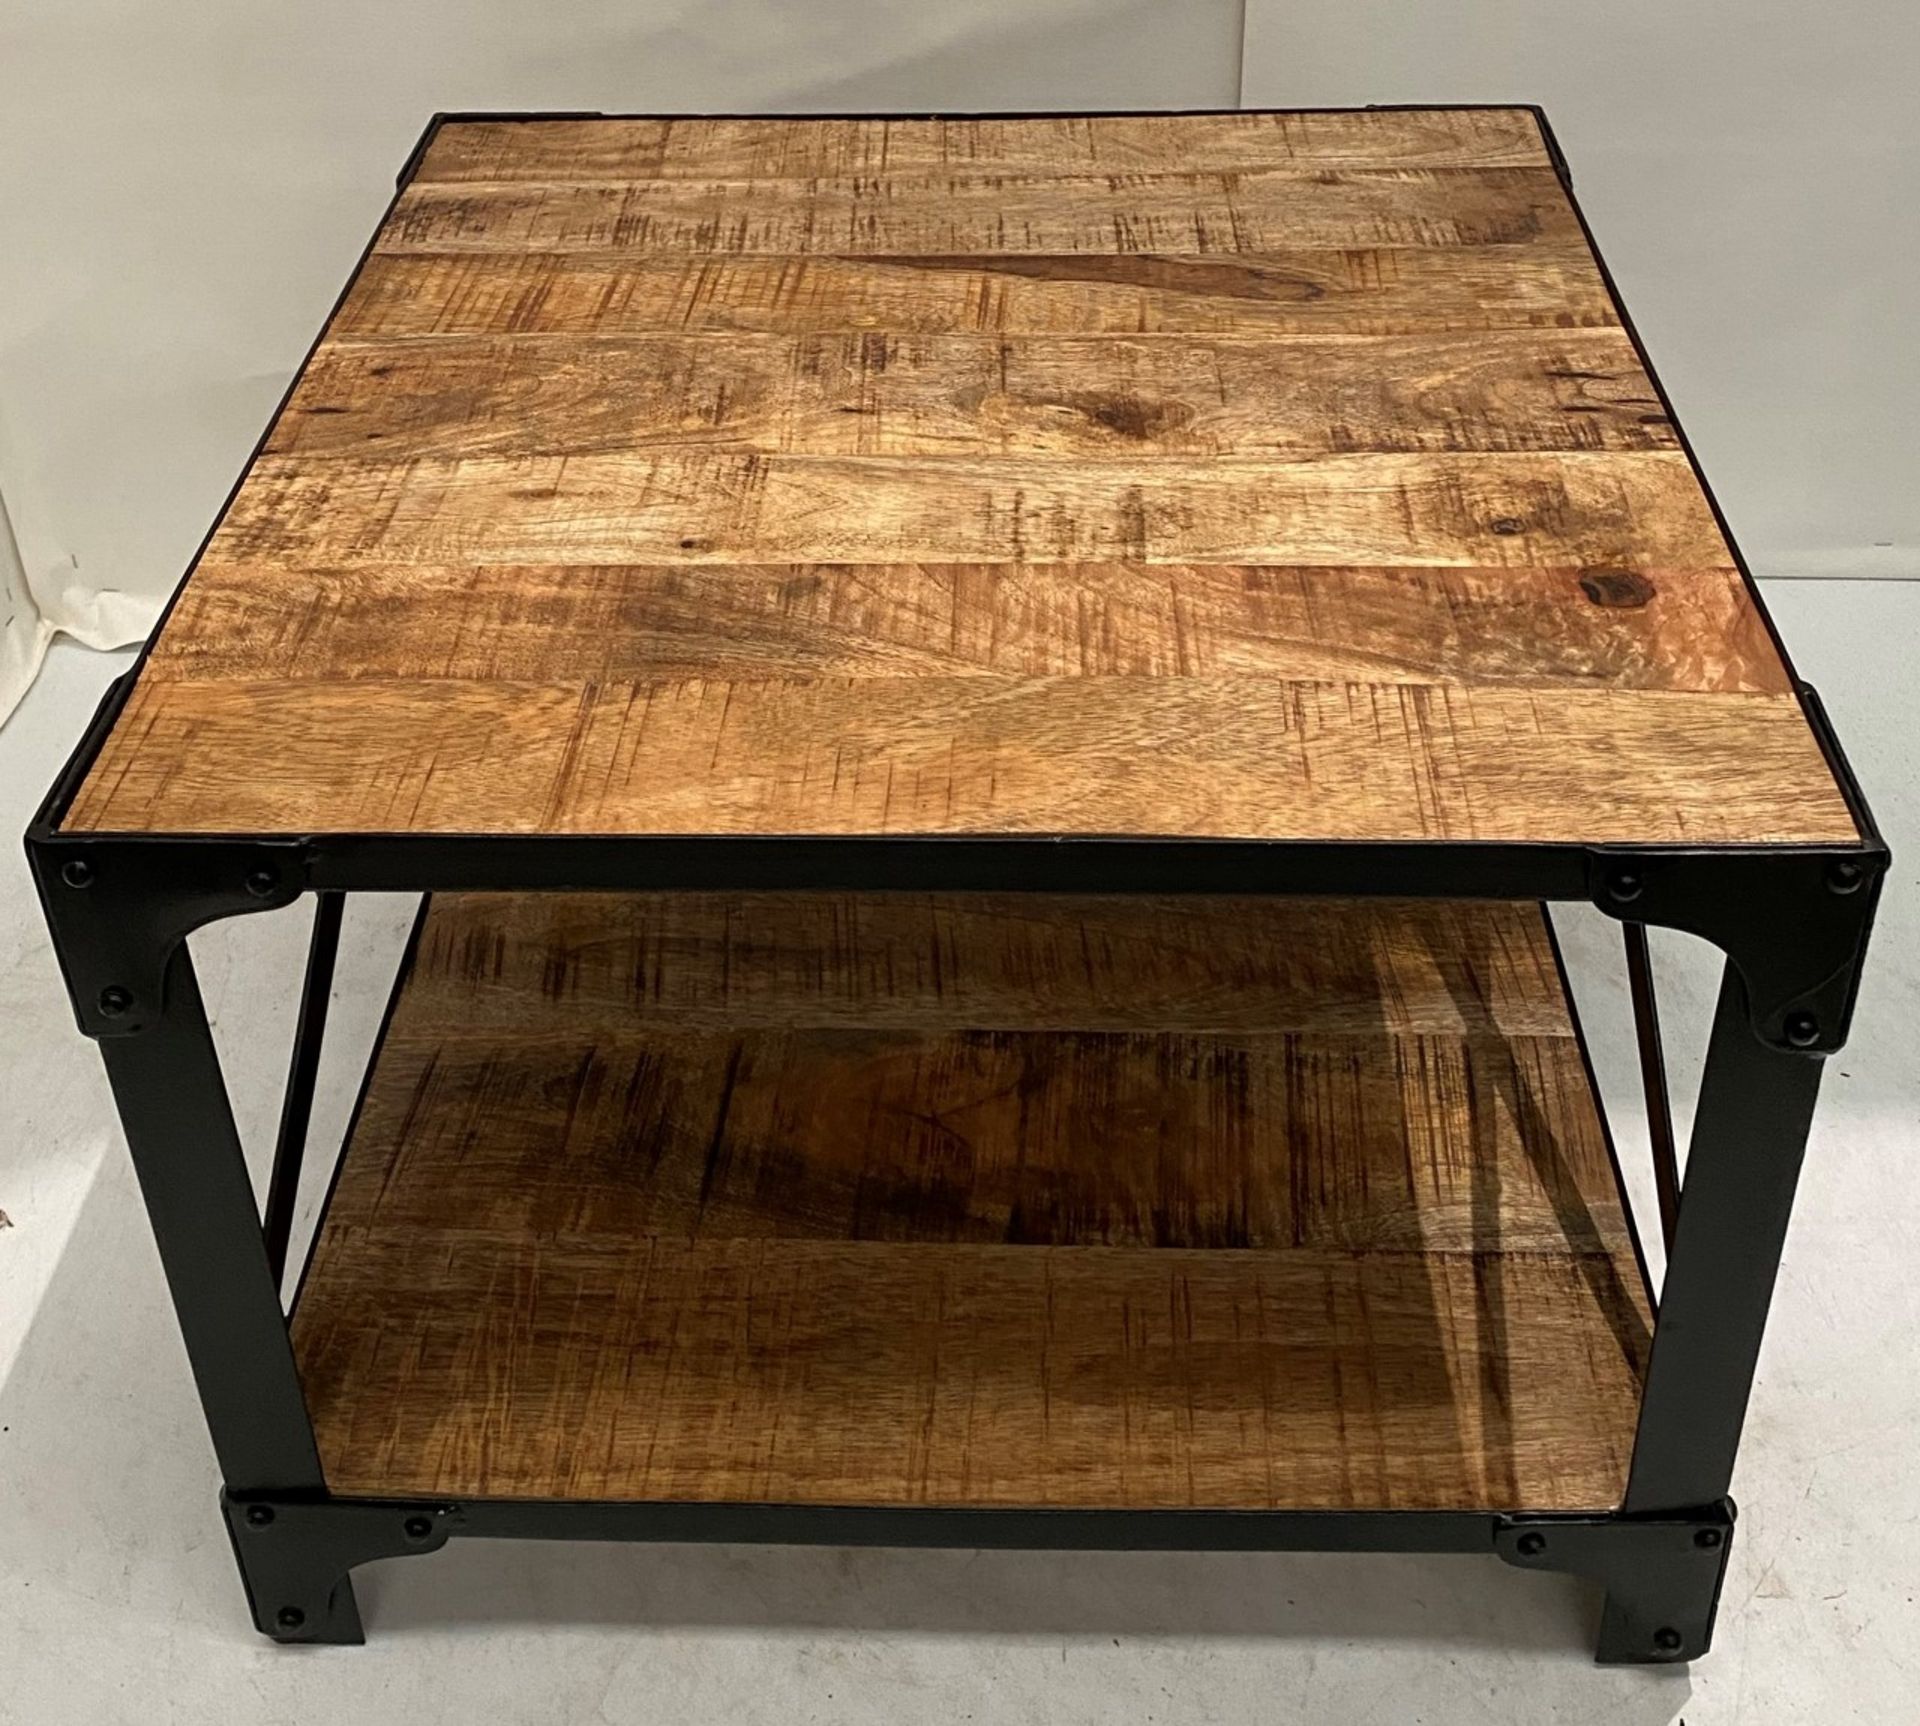 An Industrial coffee table with wooden top and black metal frame - 600mm x 600mm - Image 3 of 6